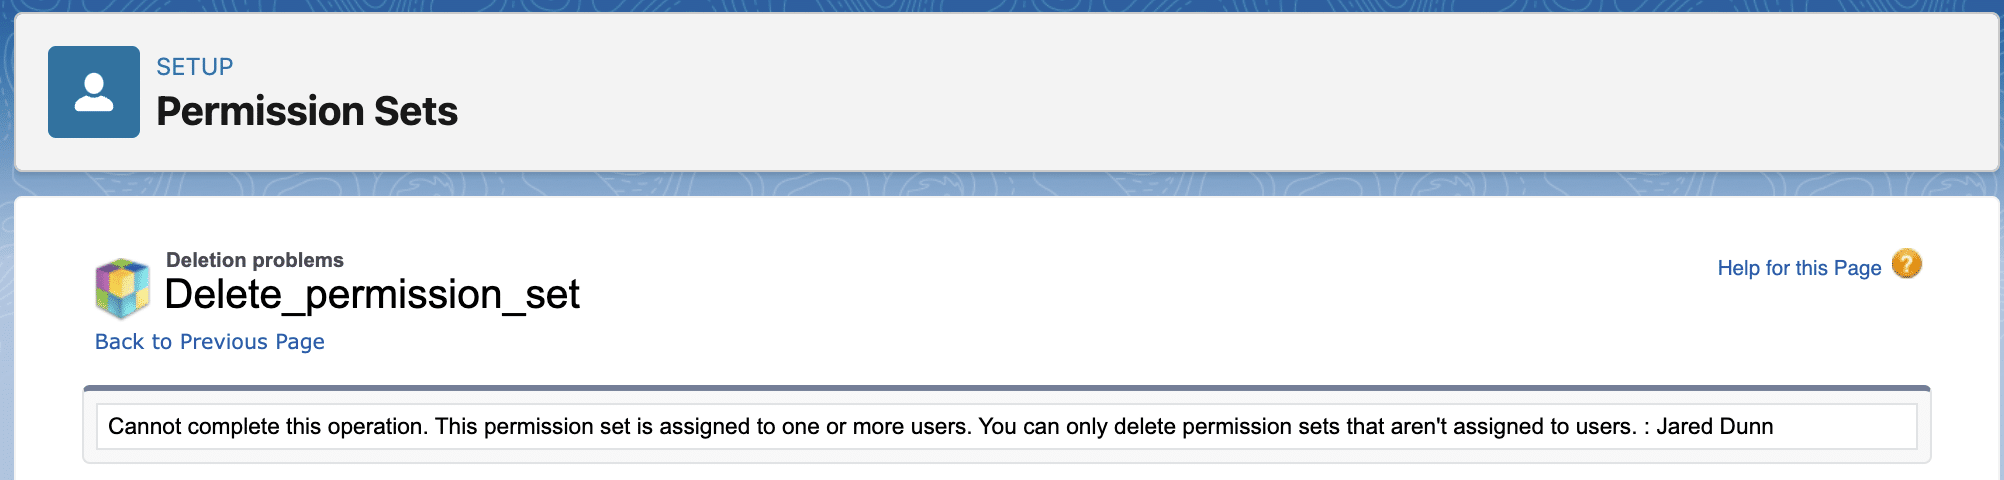 Get Notified Before Deleting Permission Sets Assigned to Users